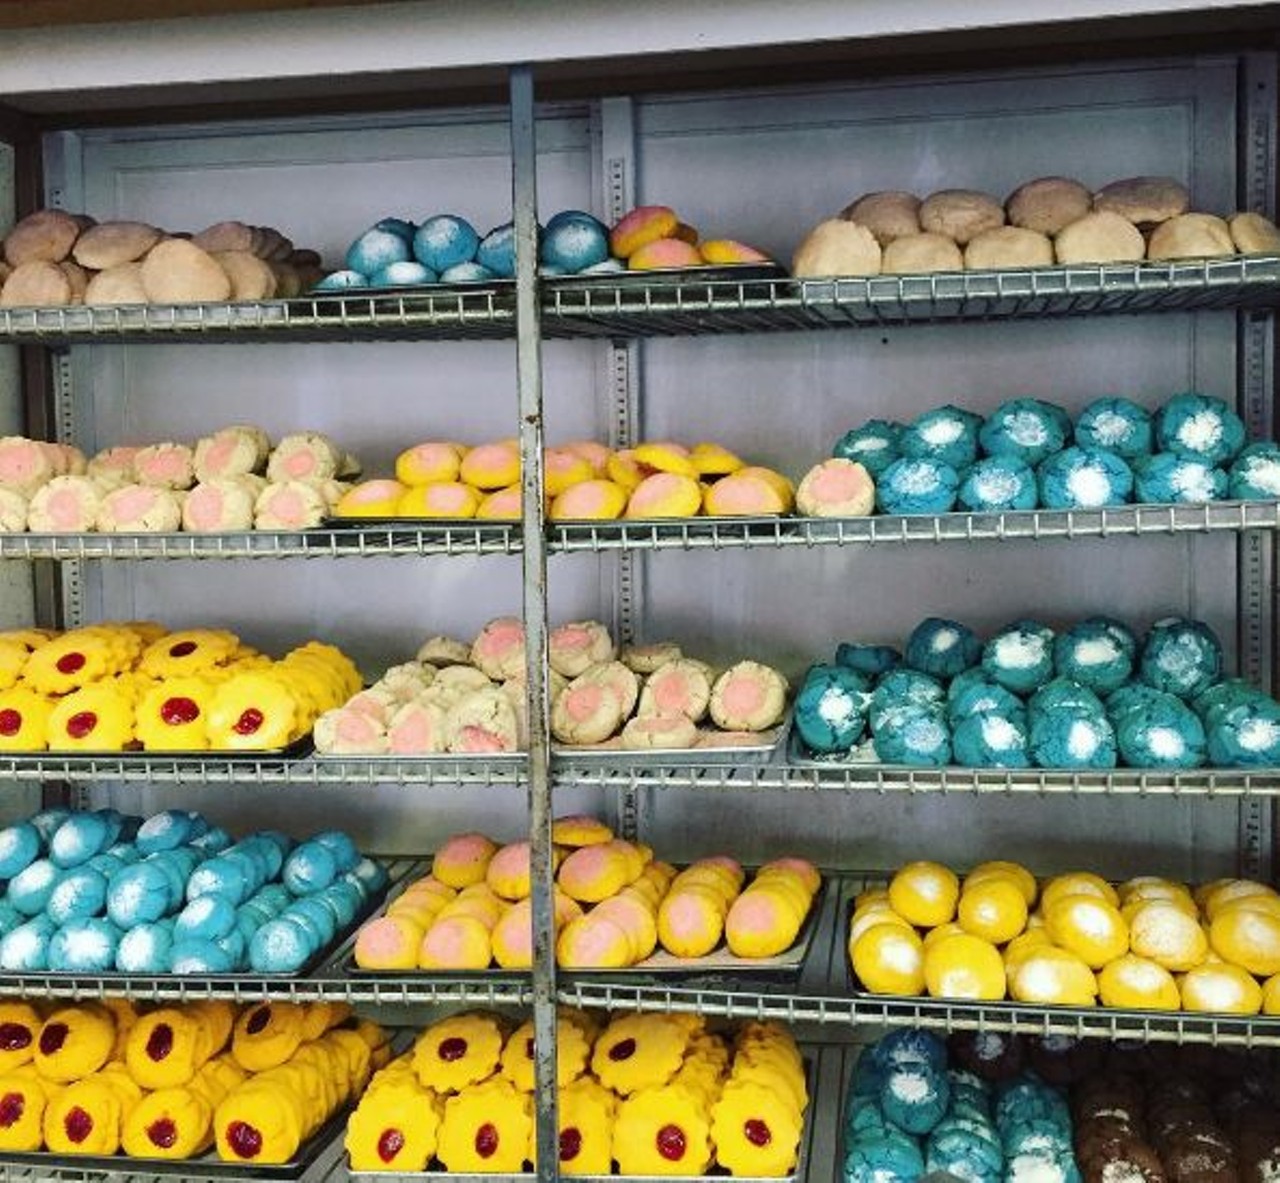 La Superior Bakery
Multiple locations, (210) 924-1616
If your abuelita has a sweet tooth for cookies, you&#146;ll soon be her favorite when you take her a bag of colorful La Superior galletas next time you visit.
Photo via Instagram, leafalu